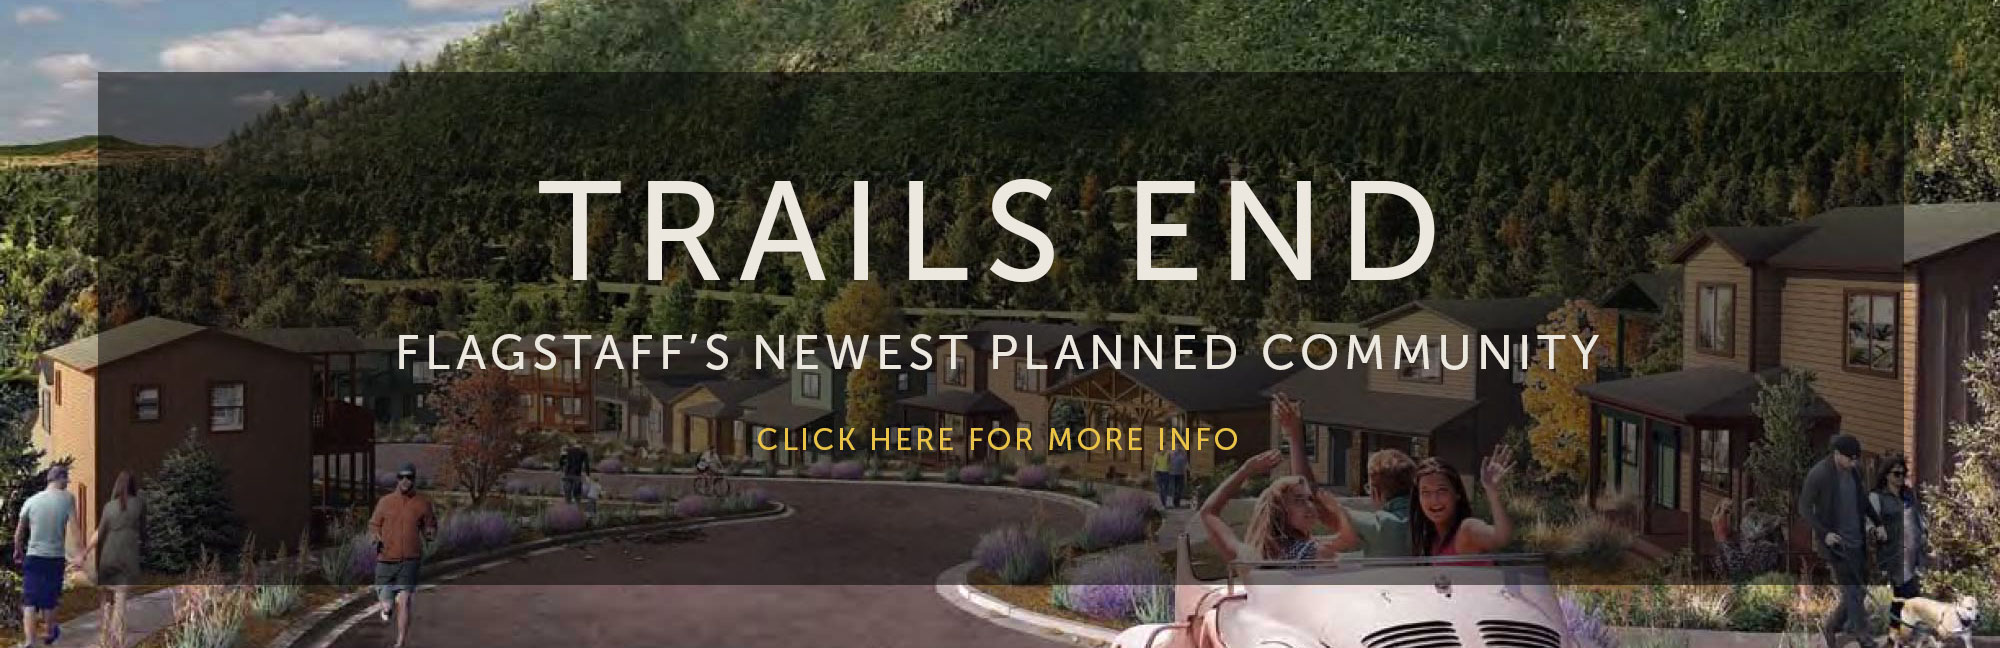 Trails End Affordable New Construction Homes for Sale in Flagstaff Arizona